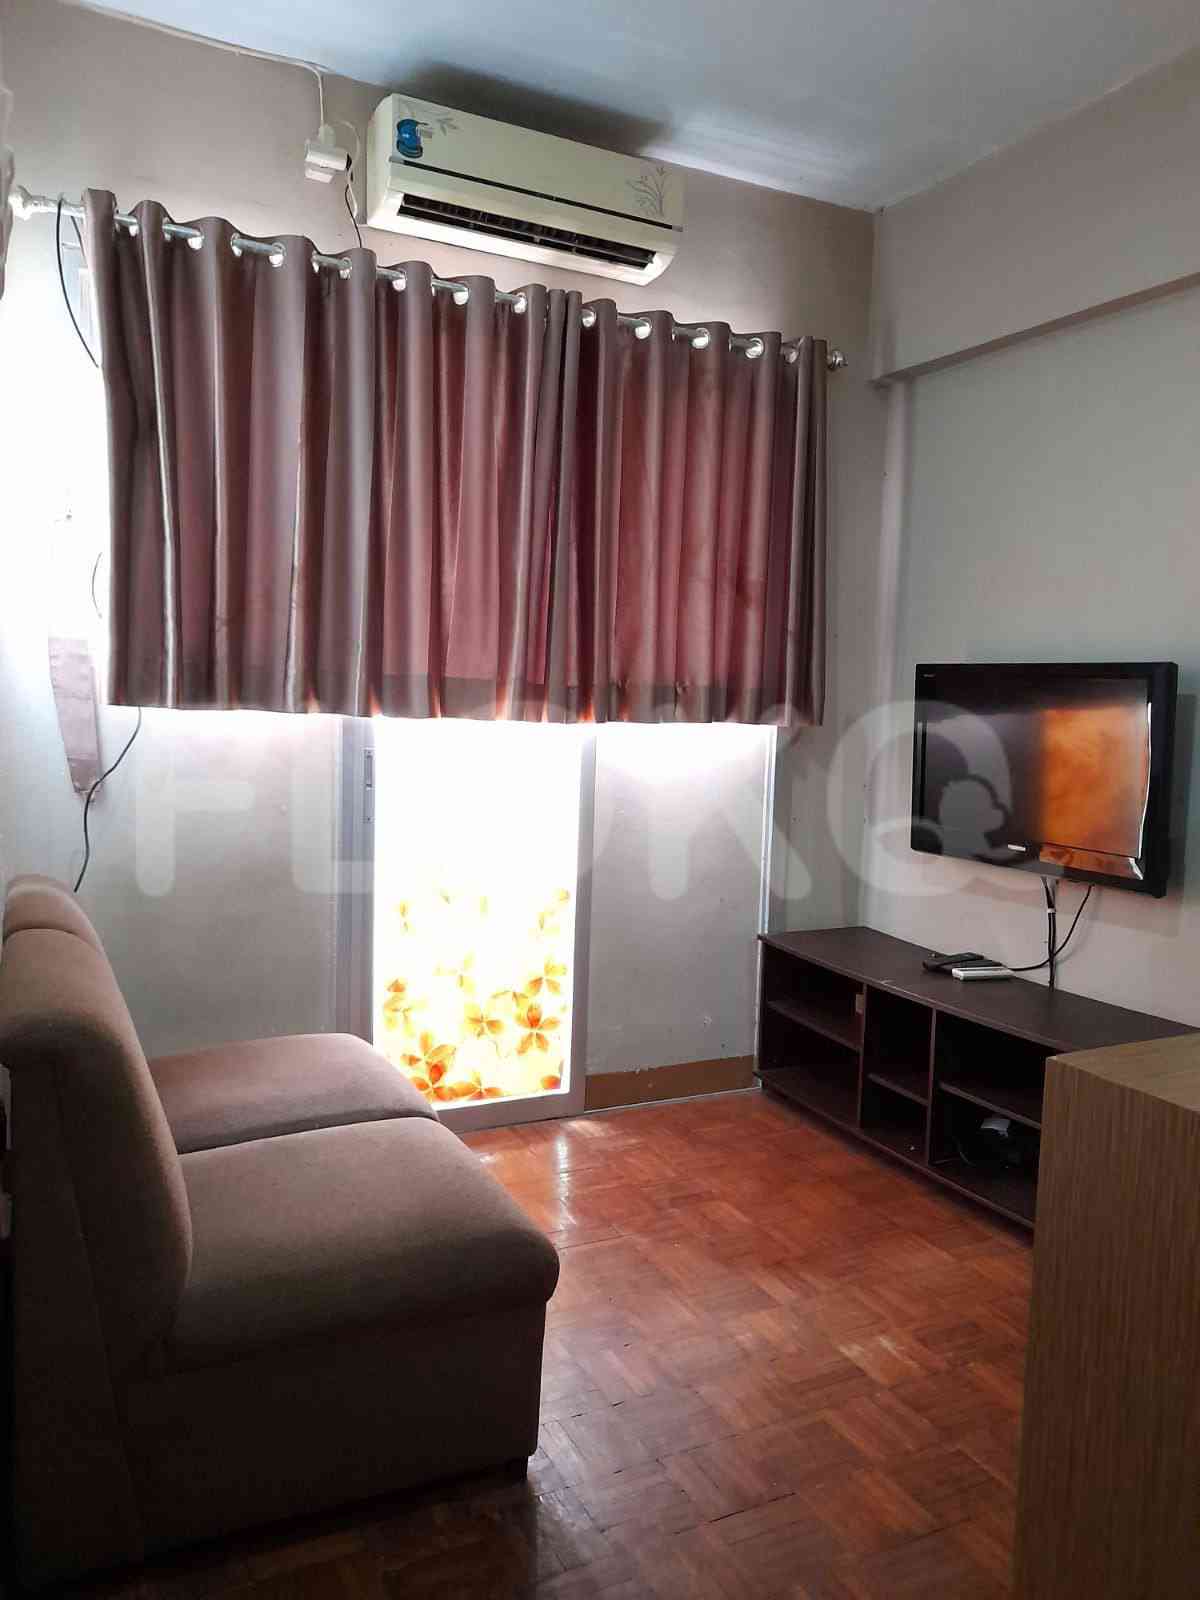 2 Bedroom on 11th Floor for Rent in Sentra Timur Residence - fcaf15 2